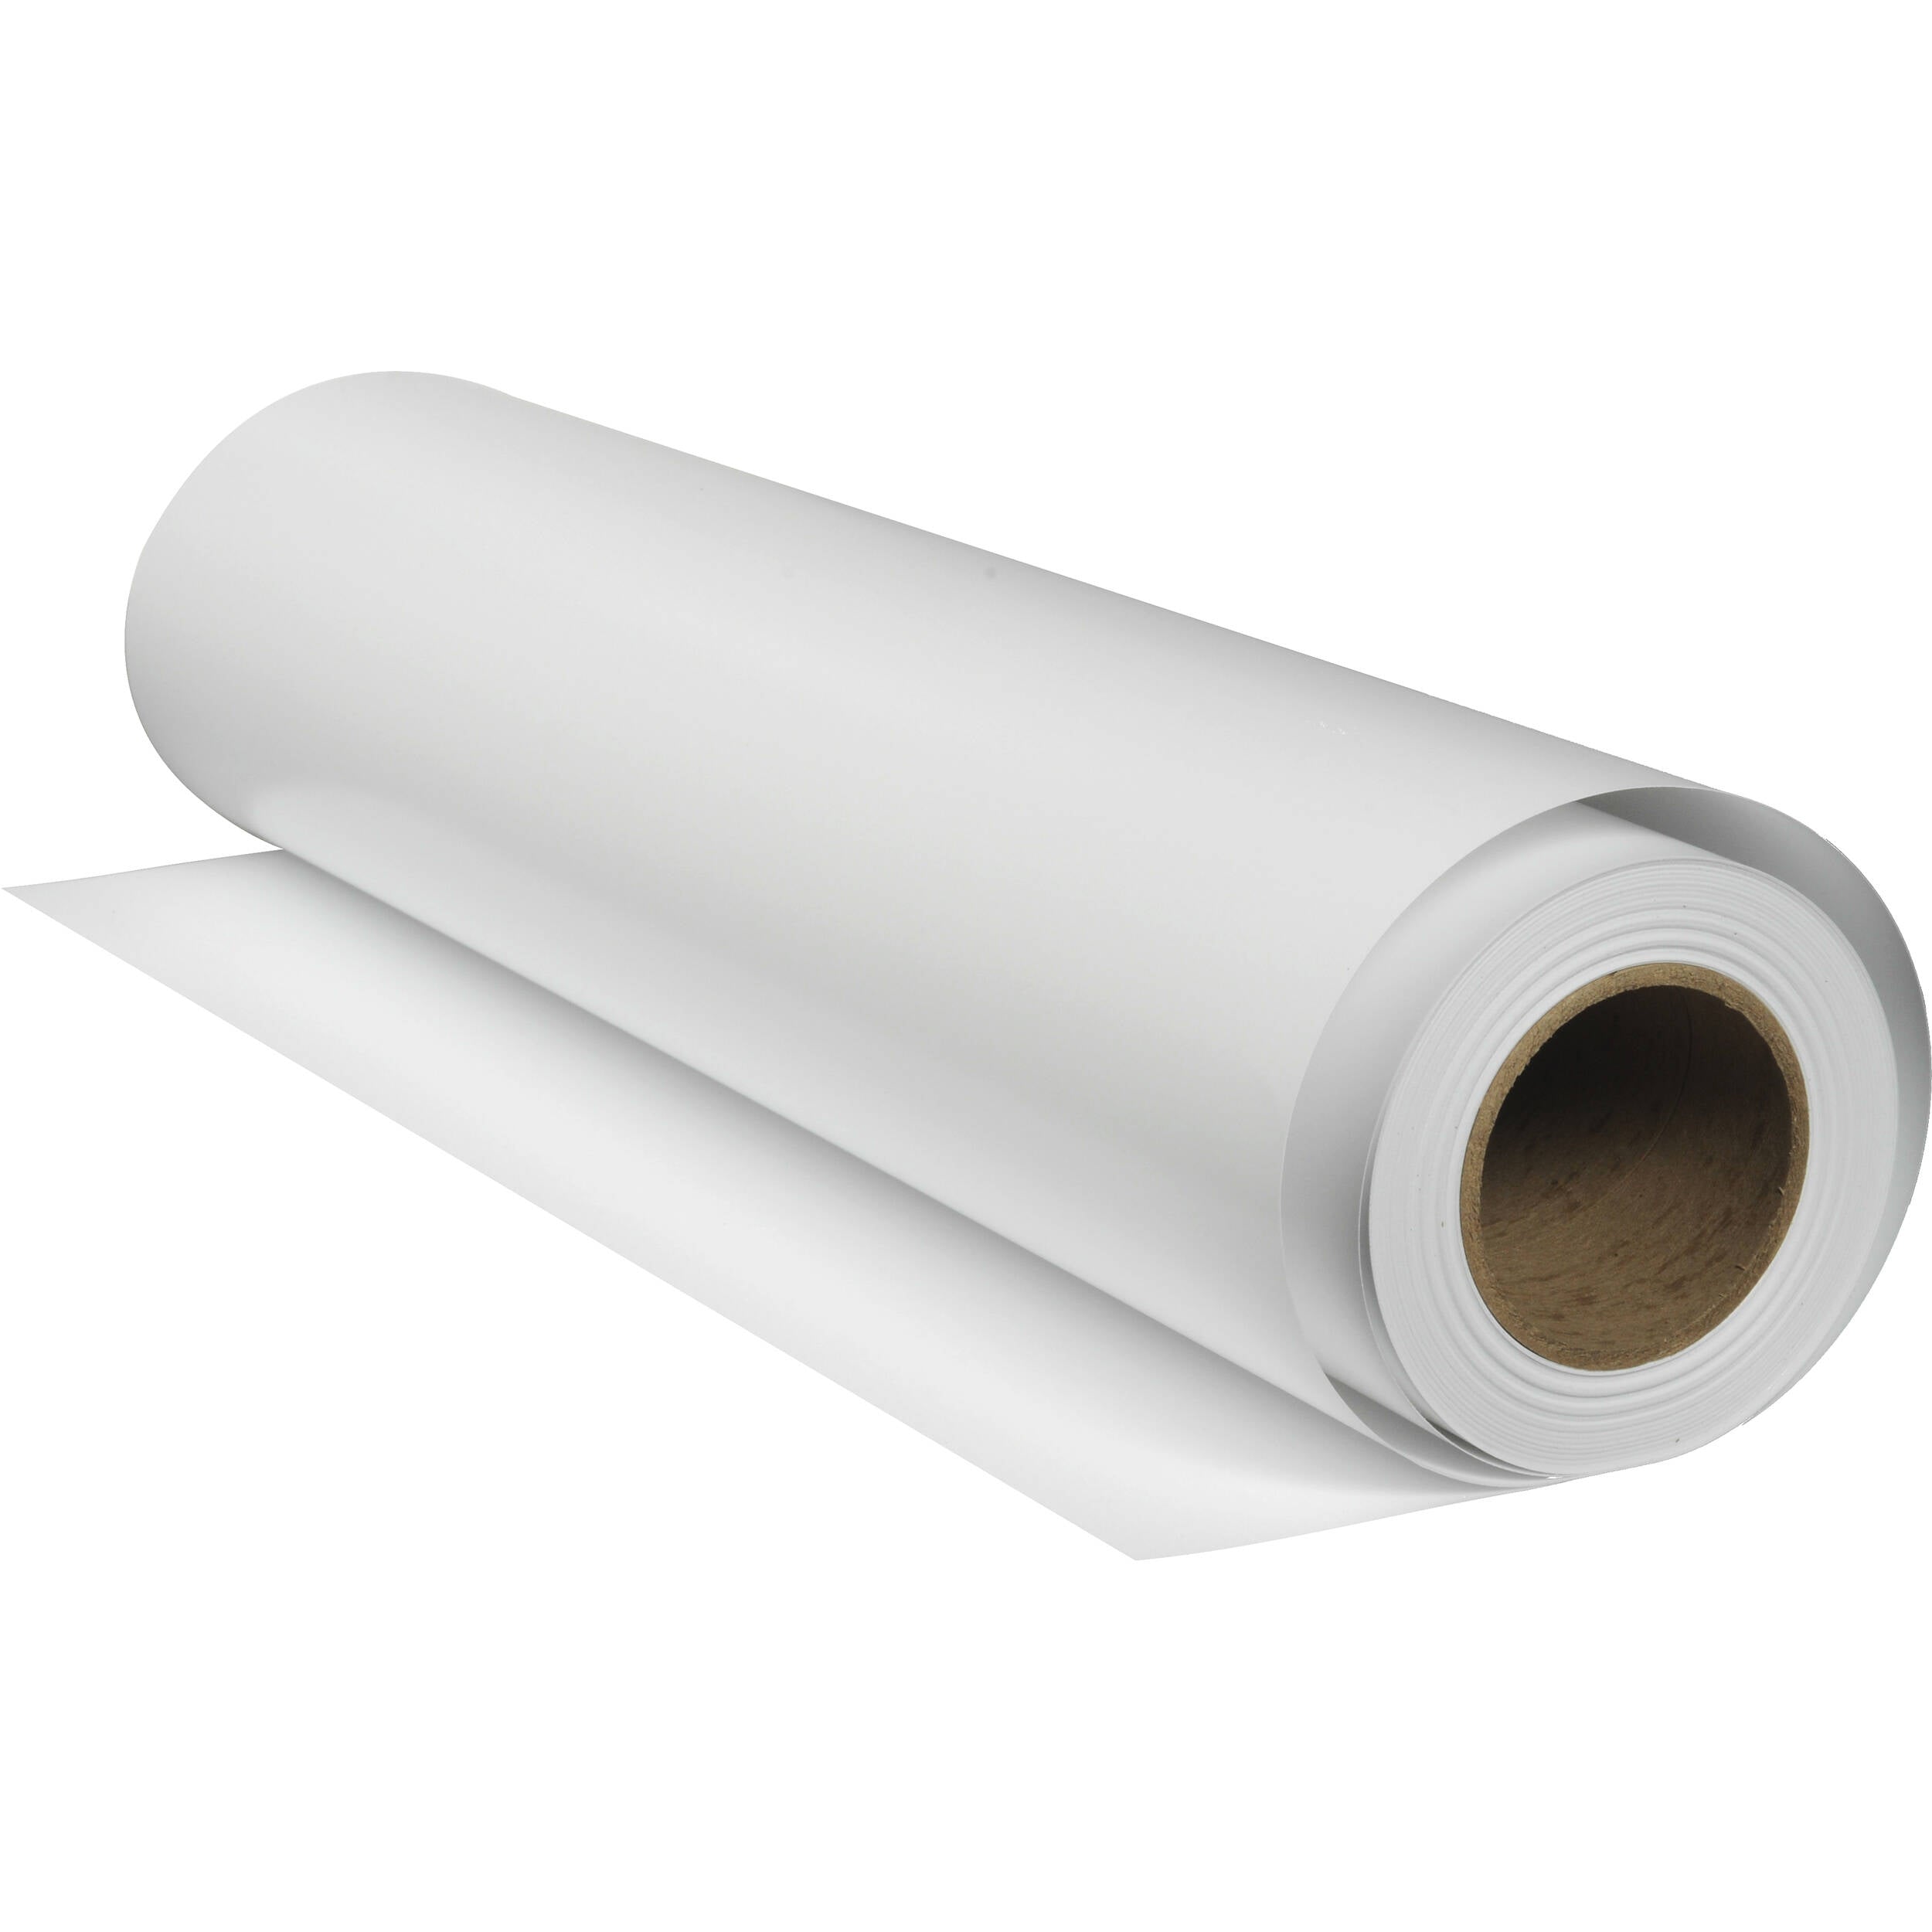 Epson DS Transfer Adhesive Textile Paper